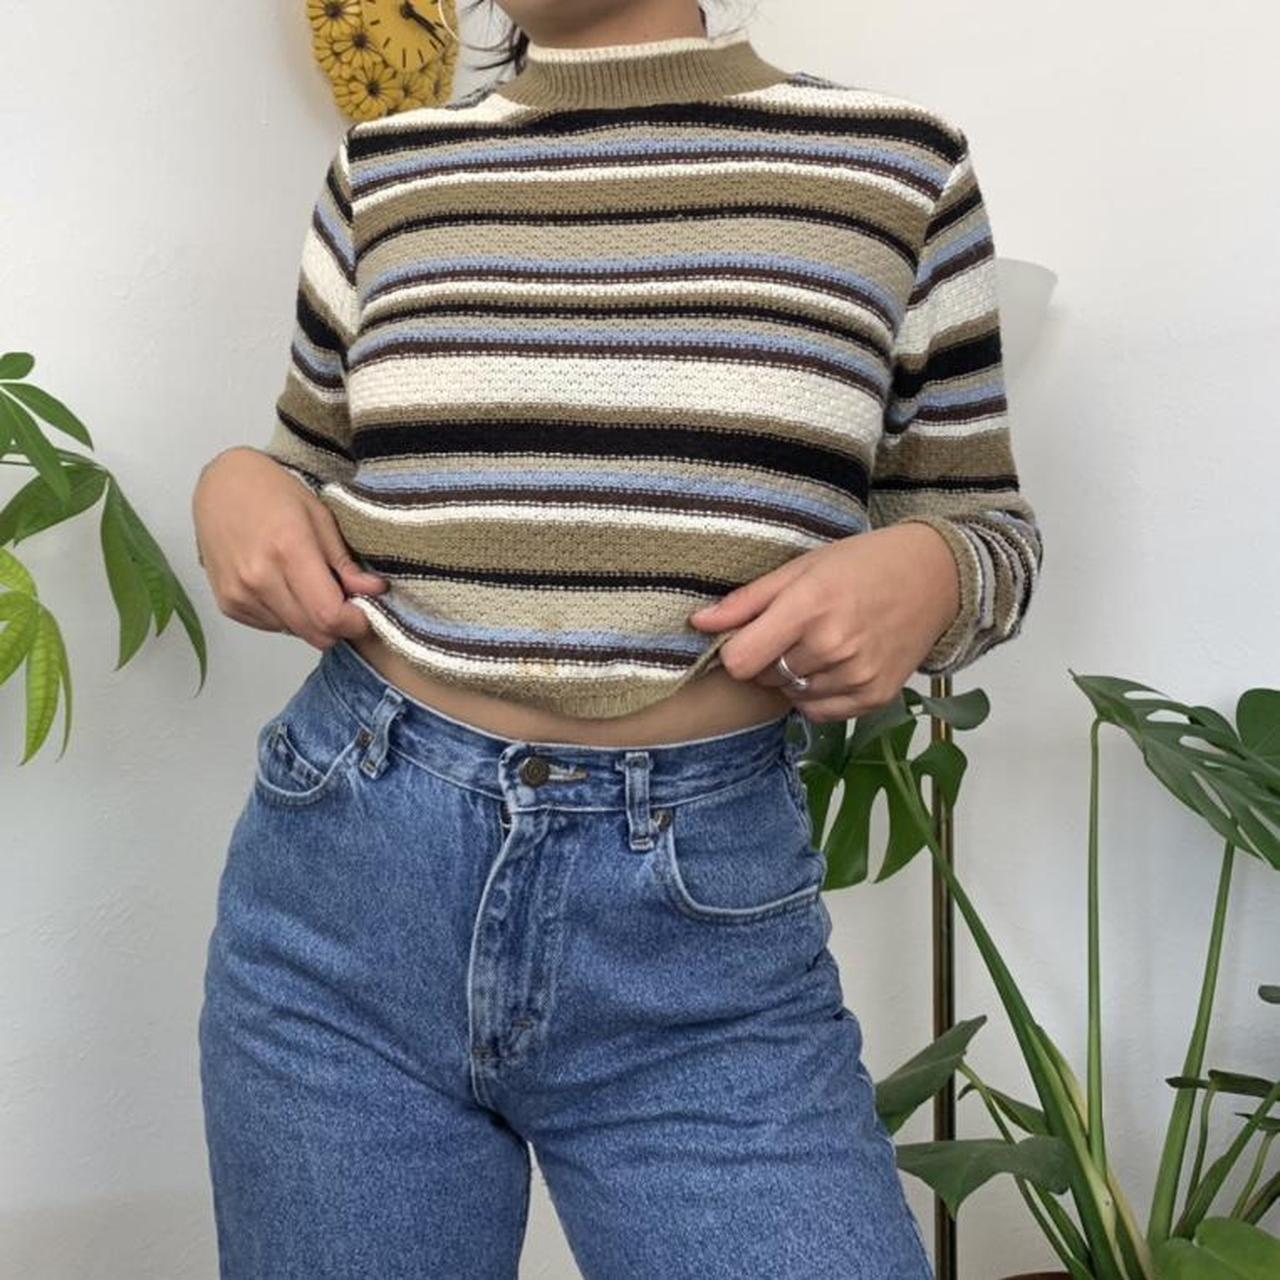 Product Image 2 - Vintage 90’s knit striped sweater